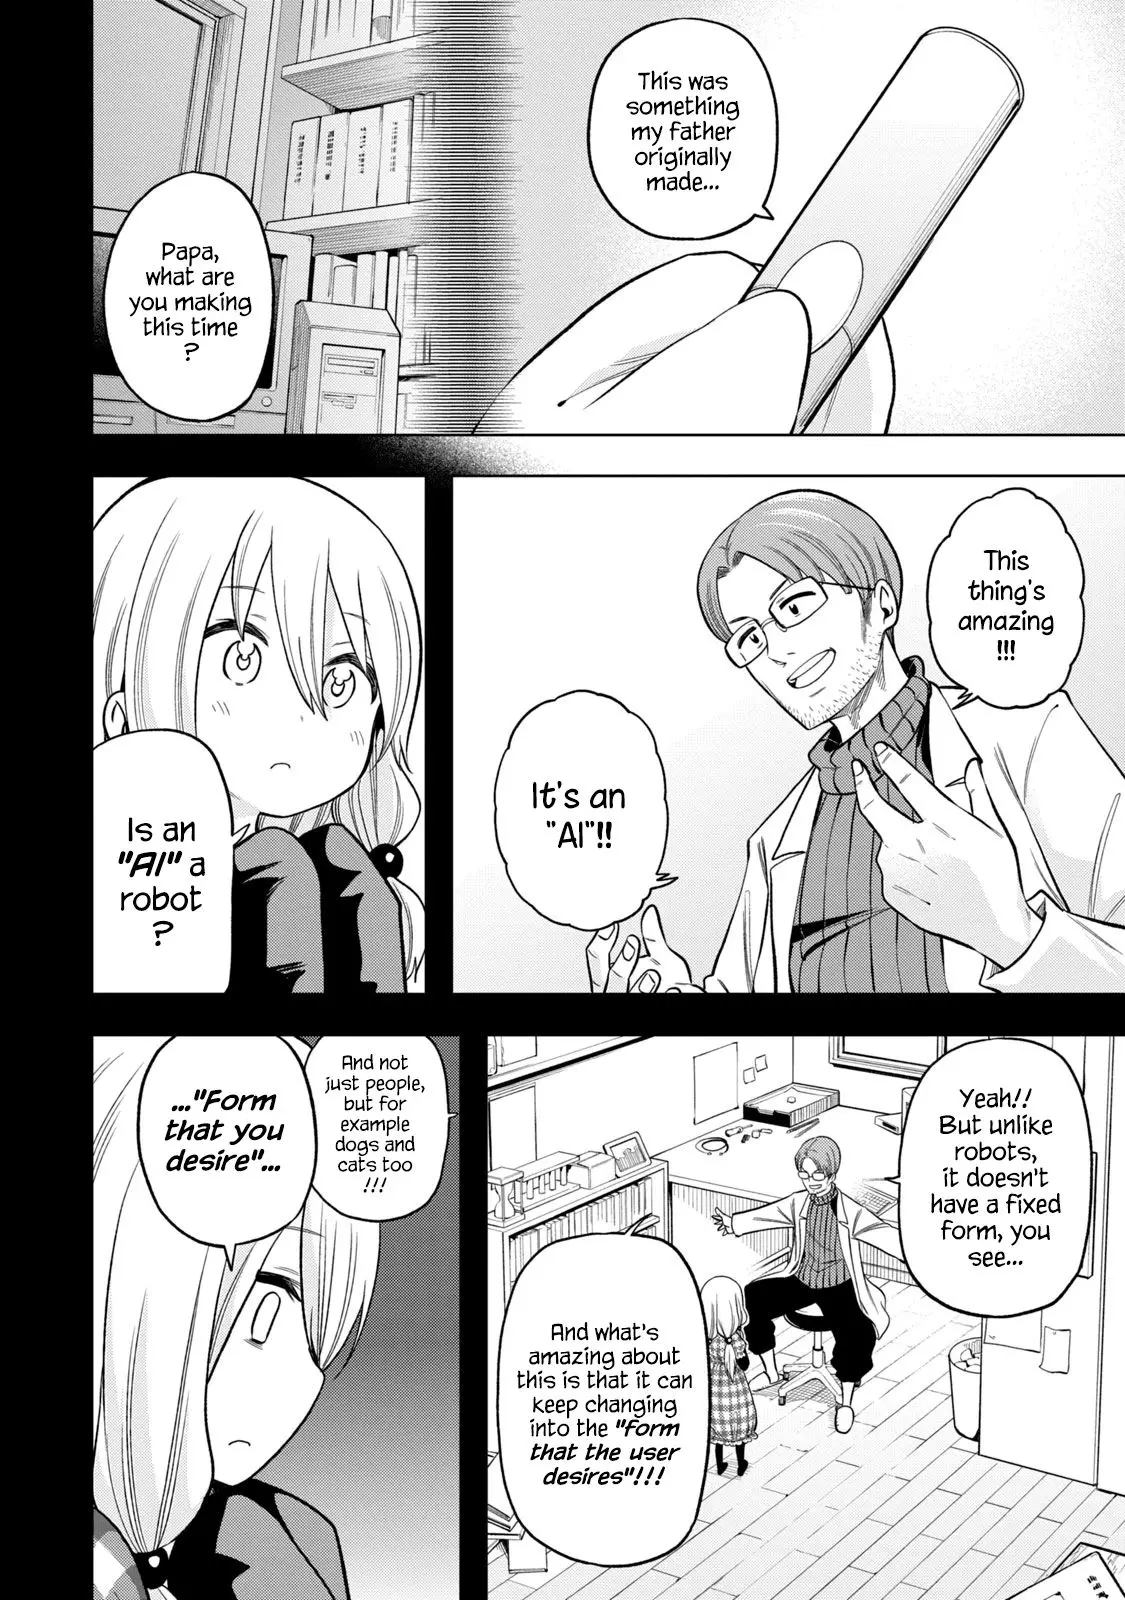 Why are you here Sensei!? - 88 page 11